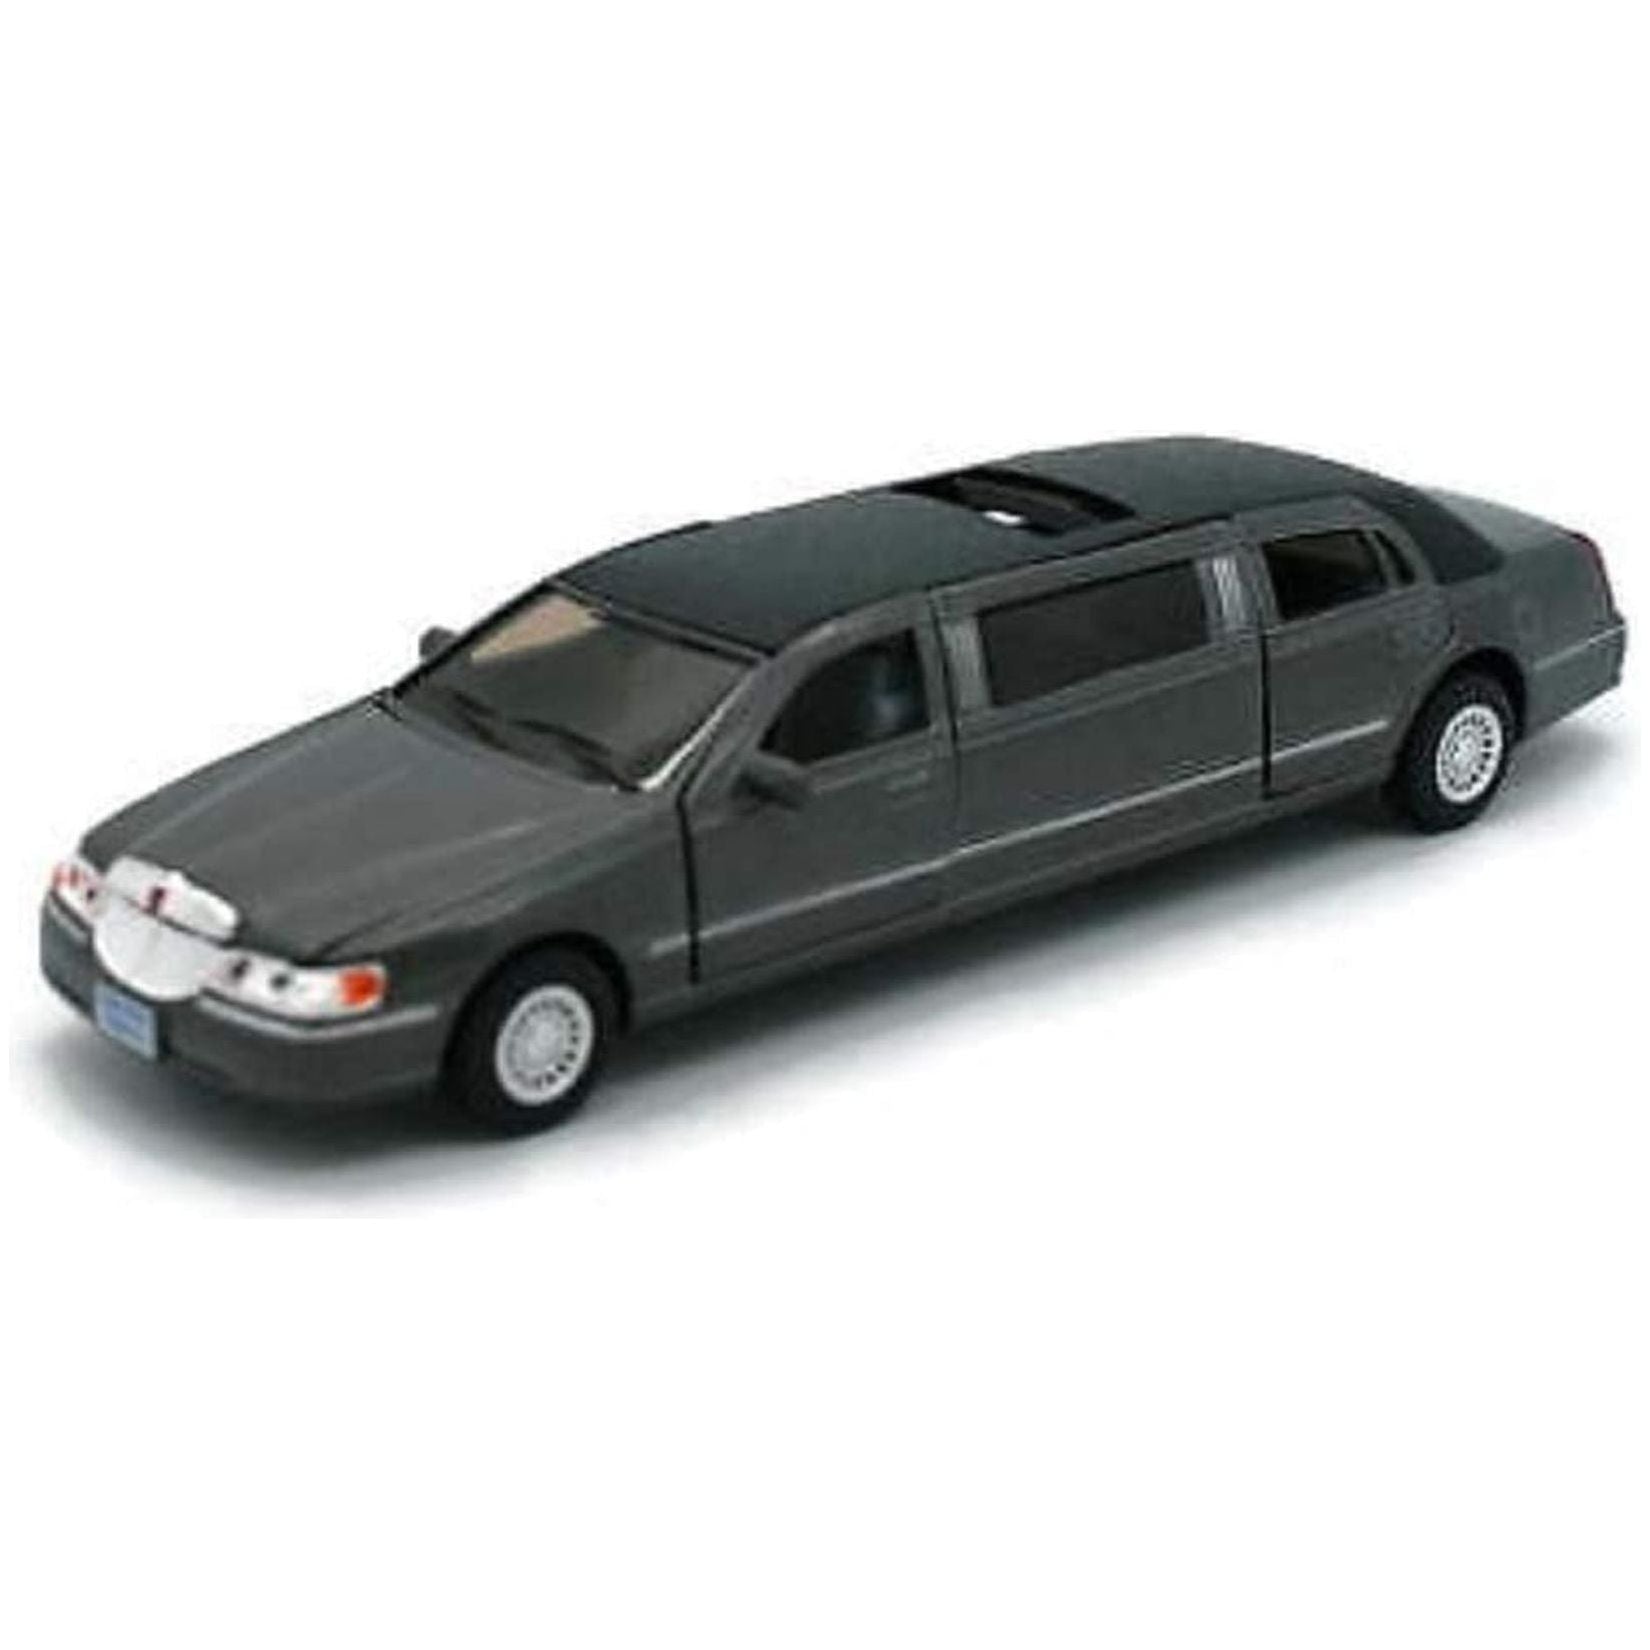 1/38 Scale Diecast 1999 Lincoln Town Car Stretch Limousine in Color Black